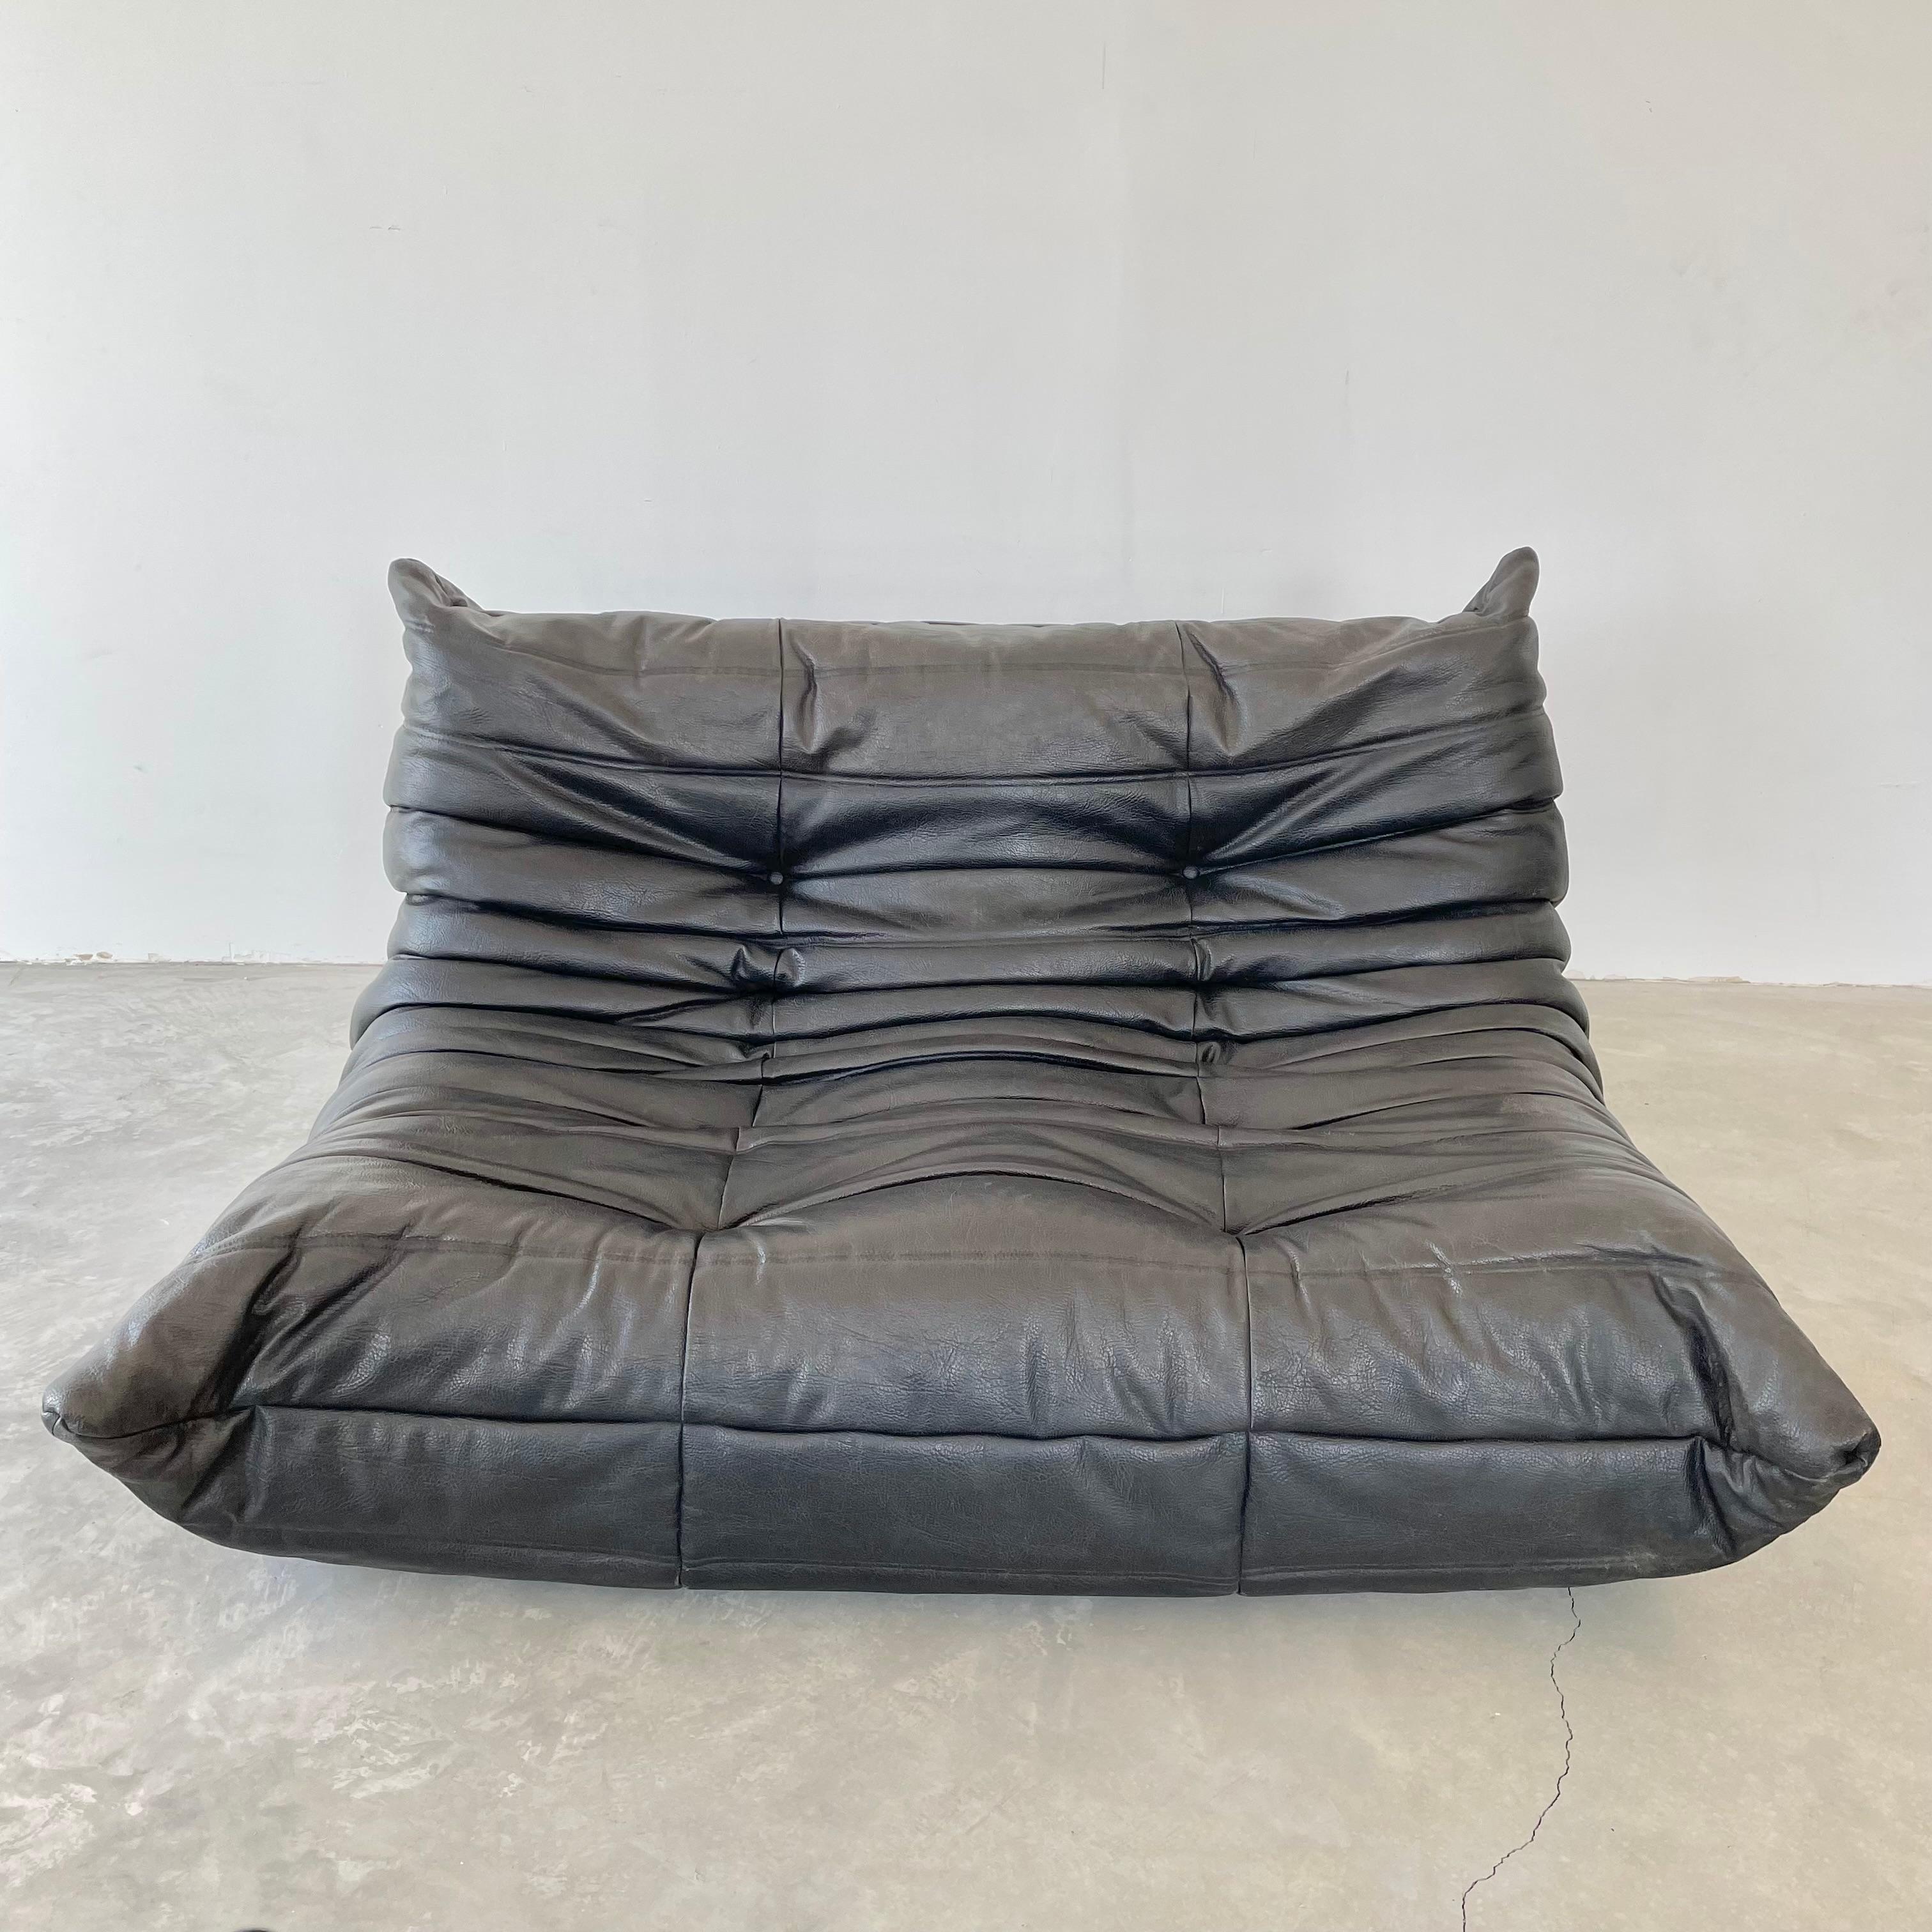 Classic French 2 seat Togo sofa by Michel Ducaroy for luxury brand Ligne Roset. Originally designed in the 1970s the iconic togo sofa is now a design classic. This sofa comes in its original vintage pebbled black leather.

Timeless comfort and